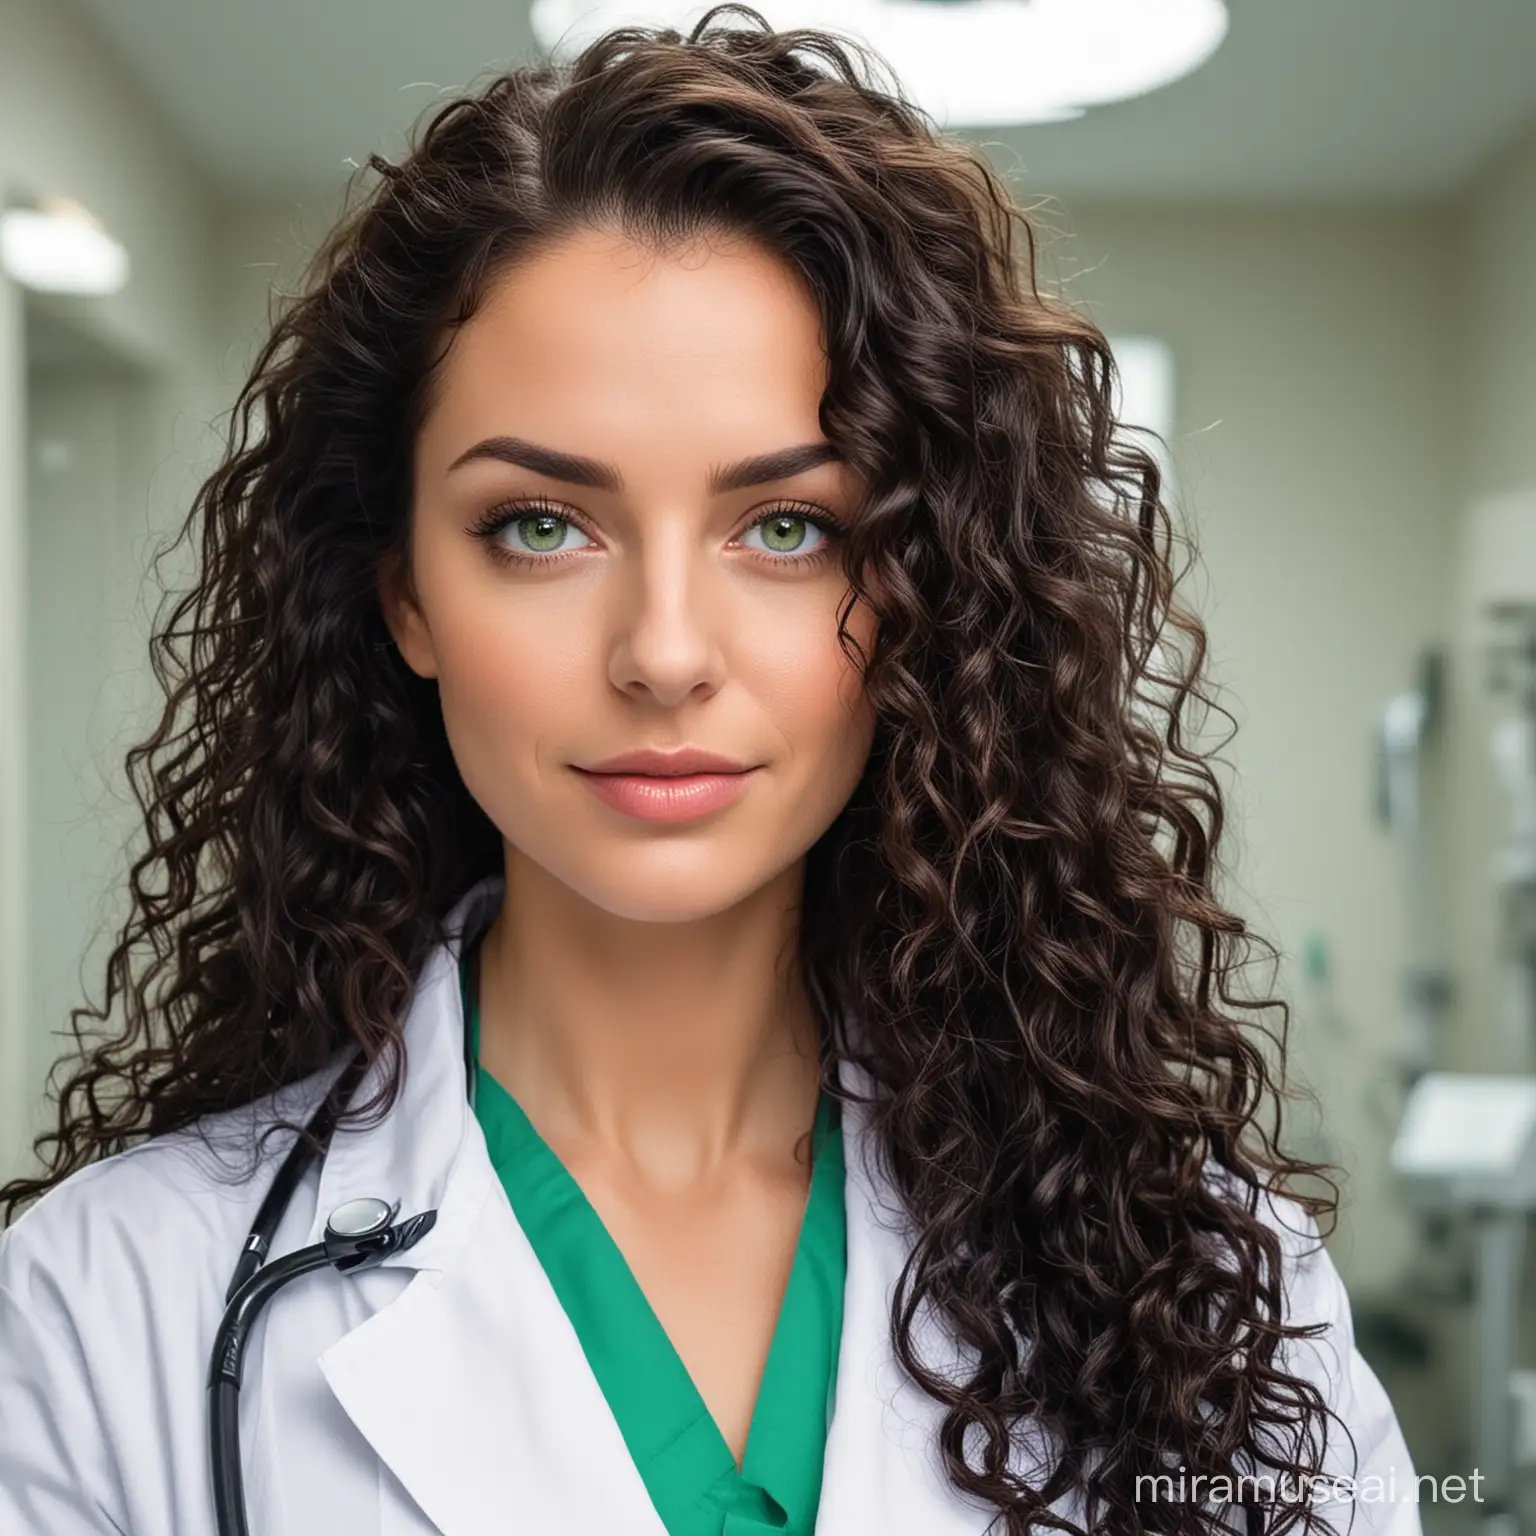 a  white nerosurgery women with very bright green eyes and dark very long curls with a white doctor coat in the hospital and Stethoscope